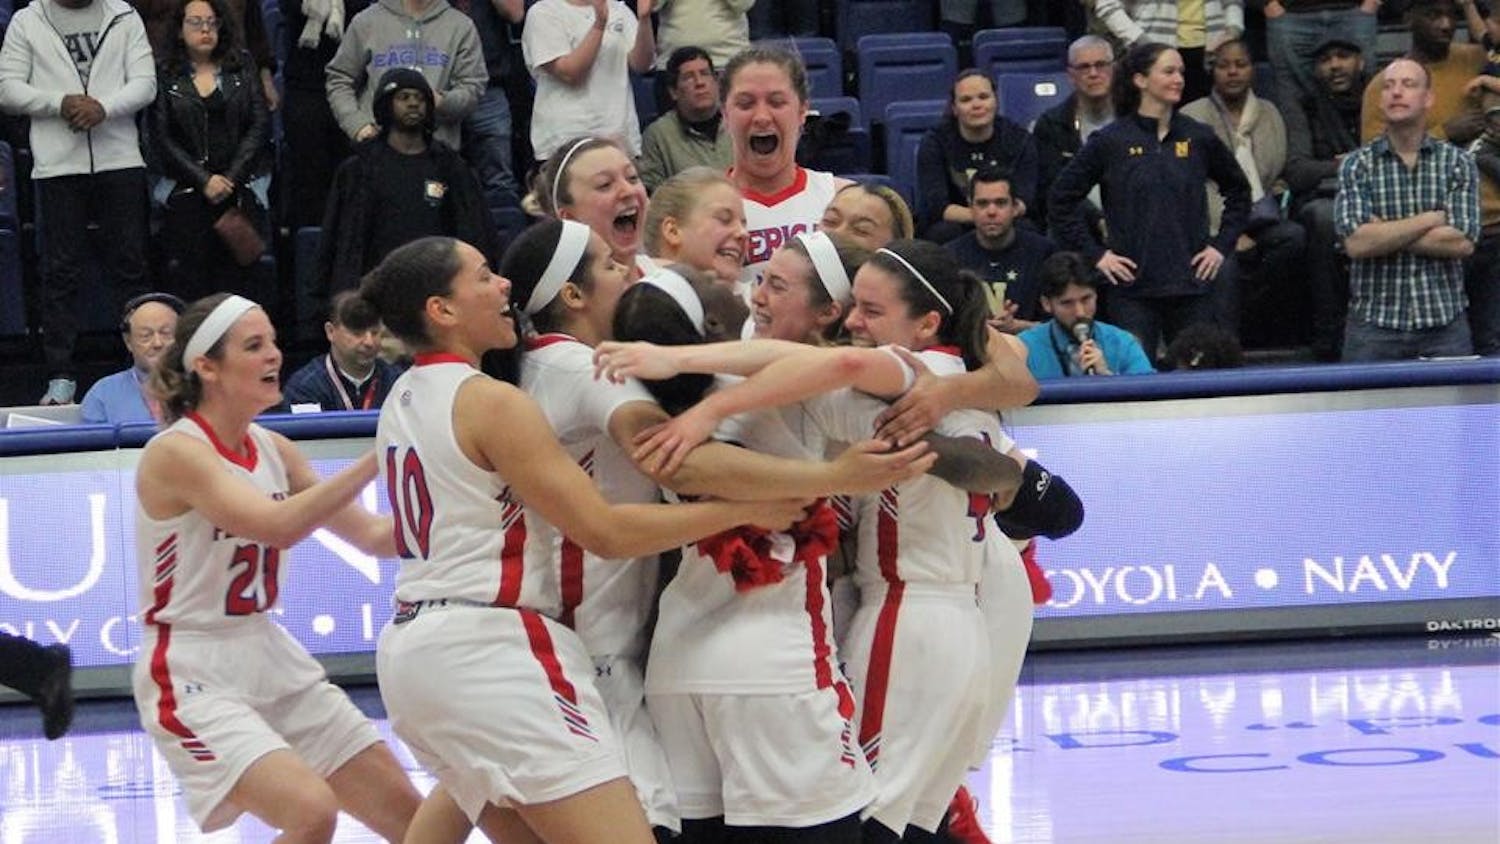 The AU women's basketball celebrates moments&nbsp;after winning the Patriot League title last Sunday.&nbsp;